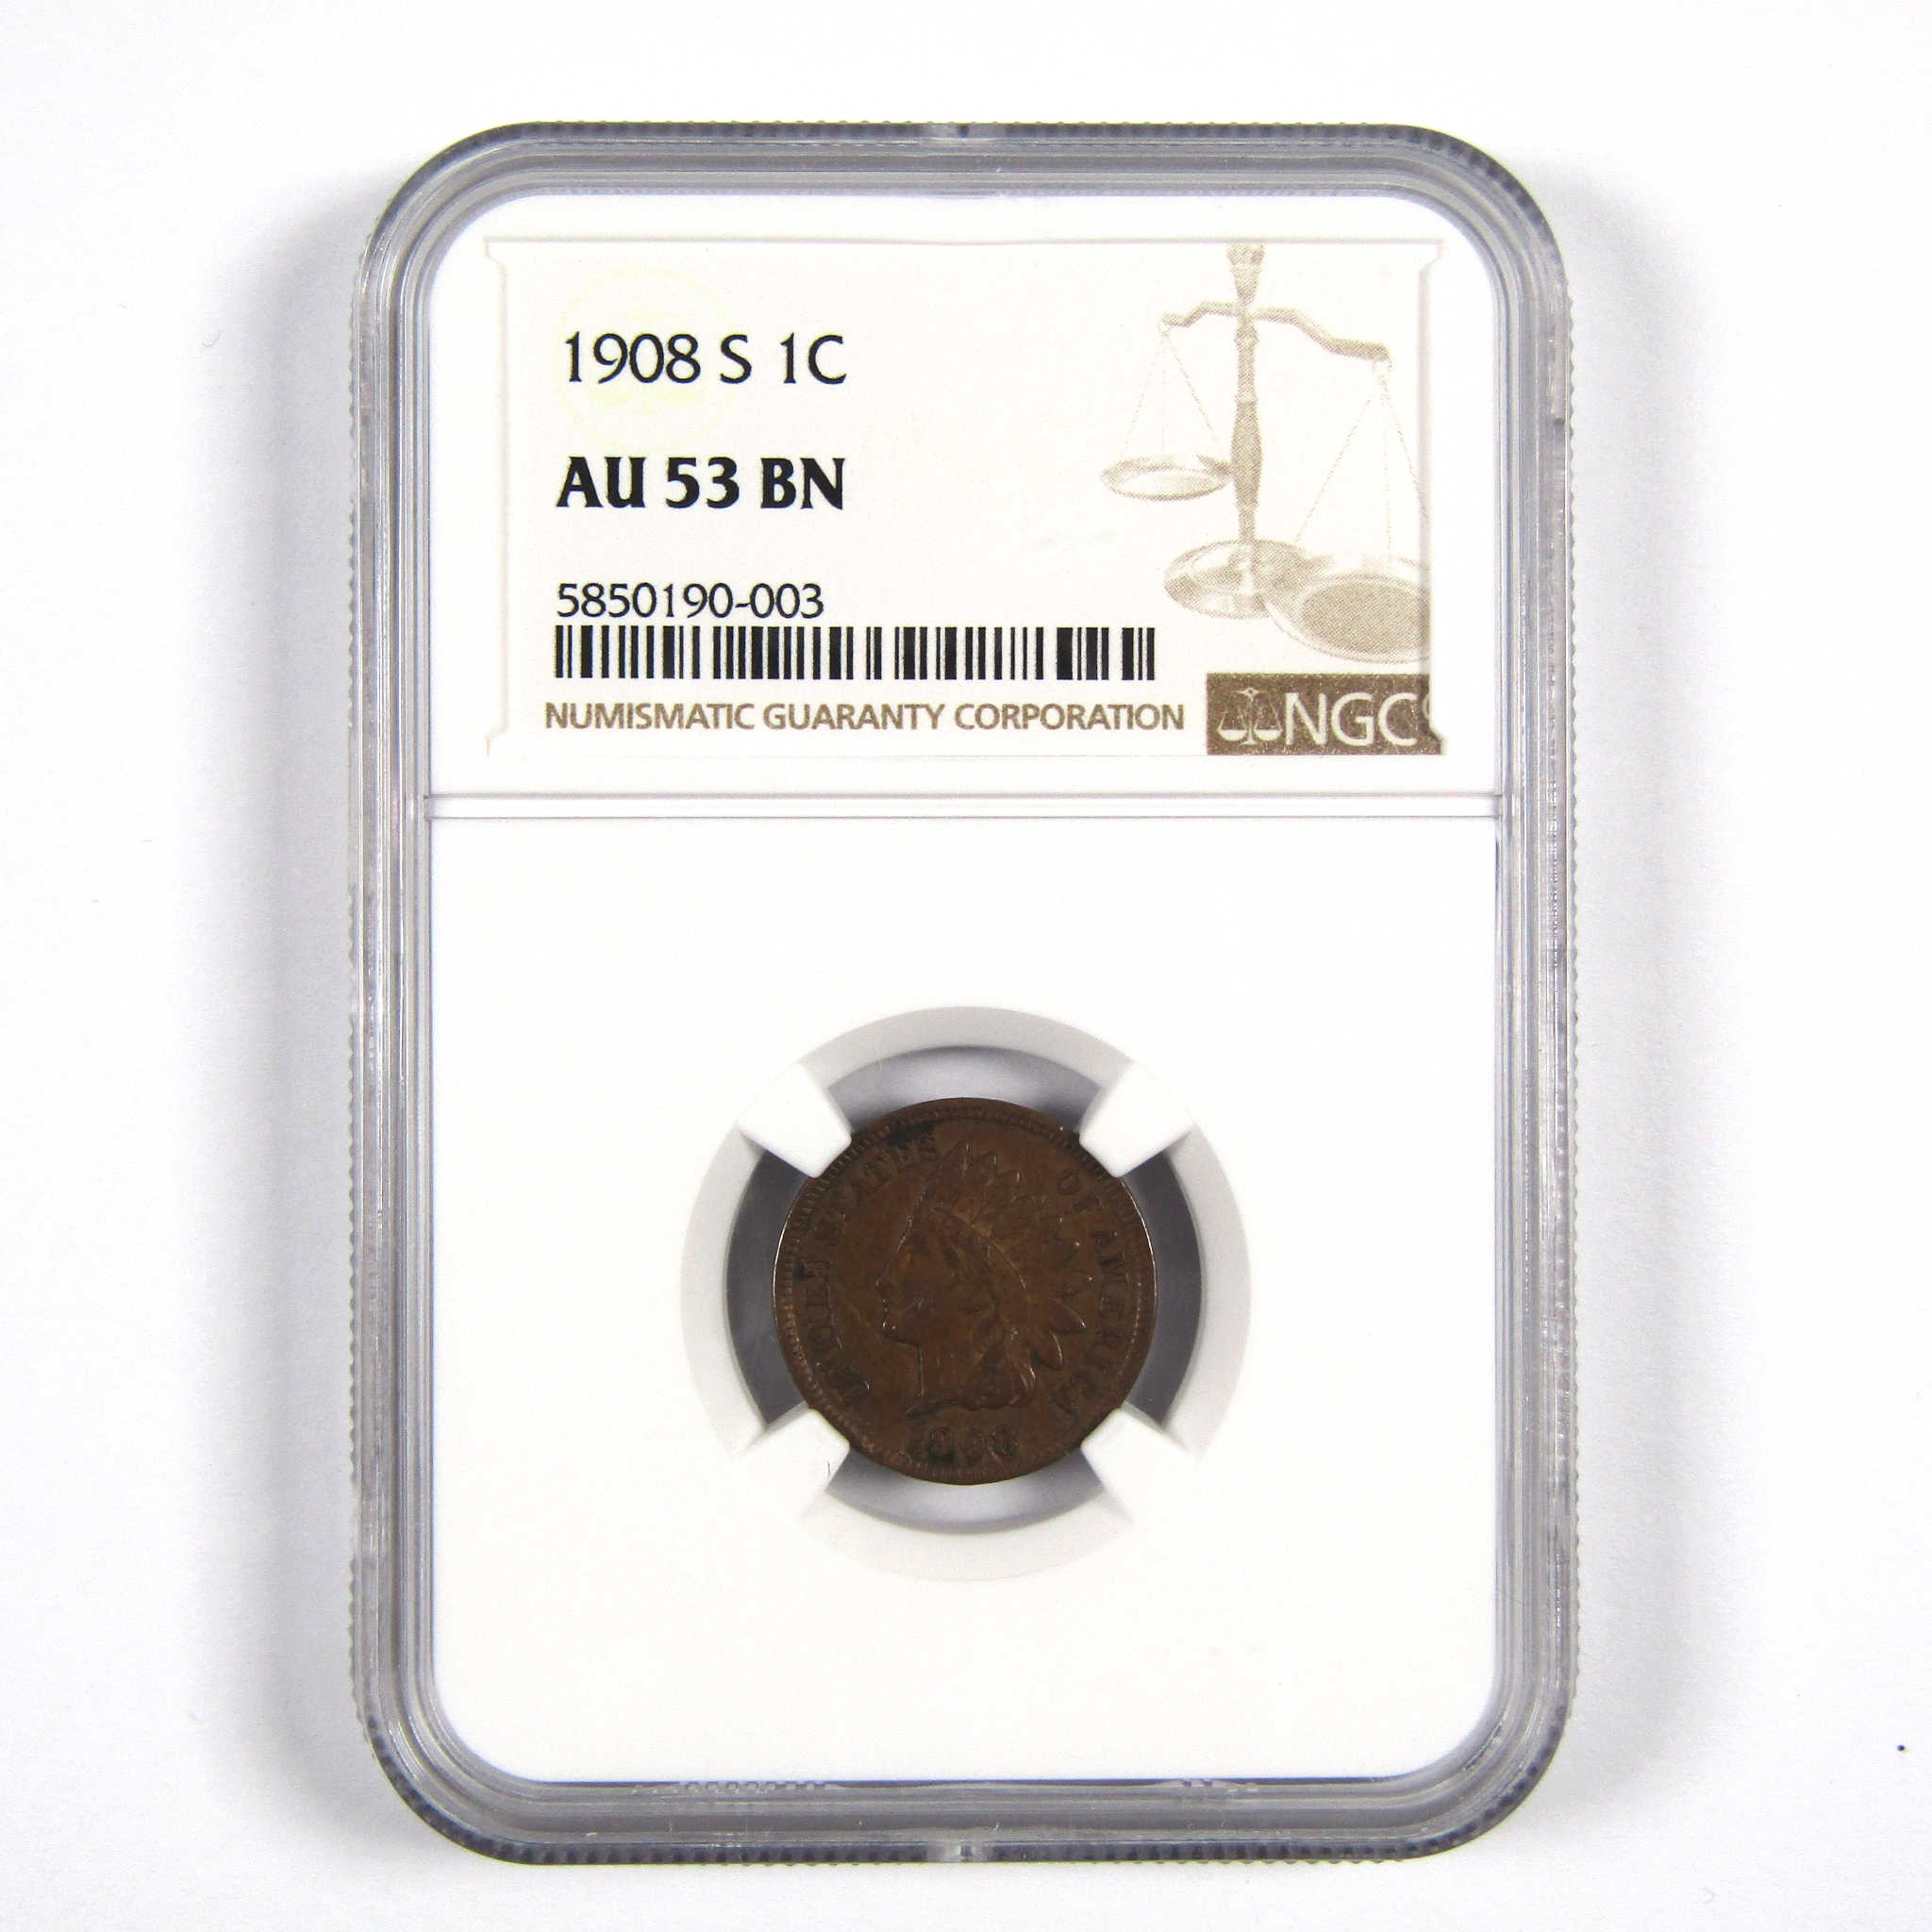 1908 S Indian Head Cent AU 53 BN NGC Penny 1c Coin SKU:I8660